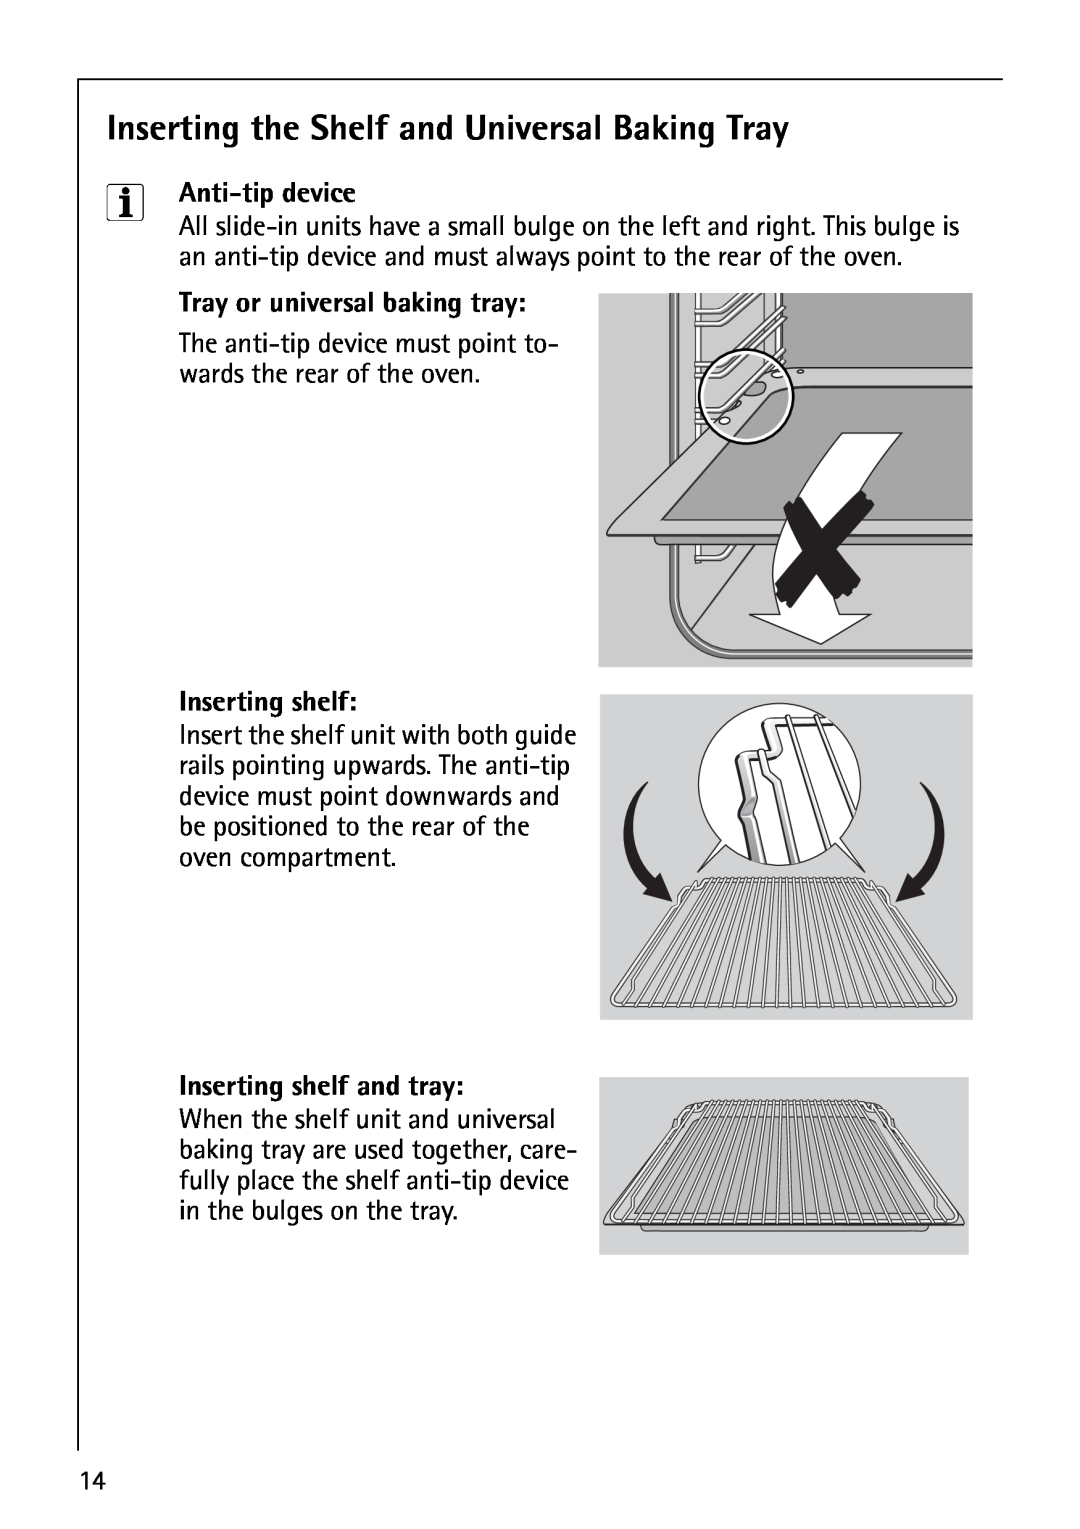 Electrolux B1100-2 manual Inserting the Shelf and Universal Baking Tray, Anti-tip device, Tray or universal baking tray 